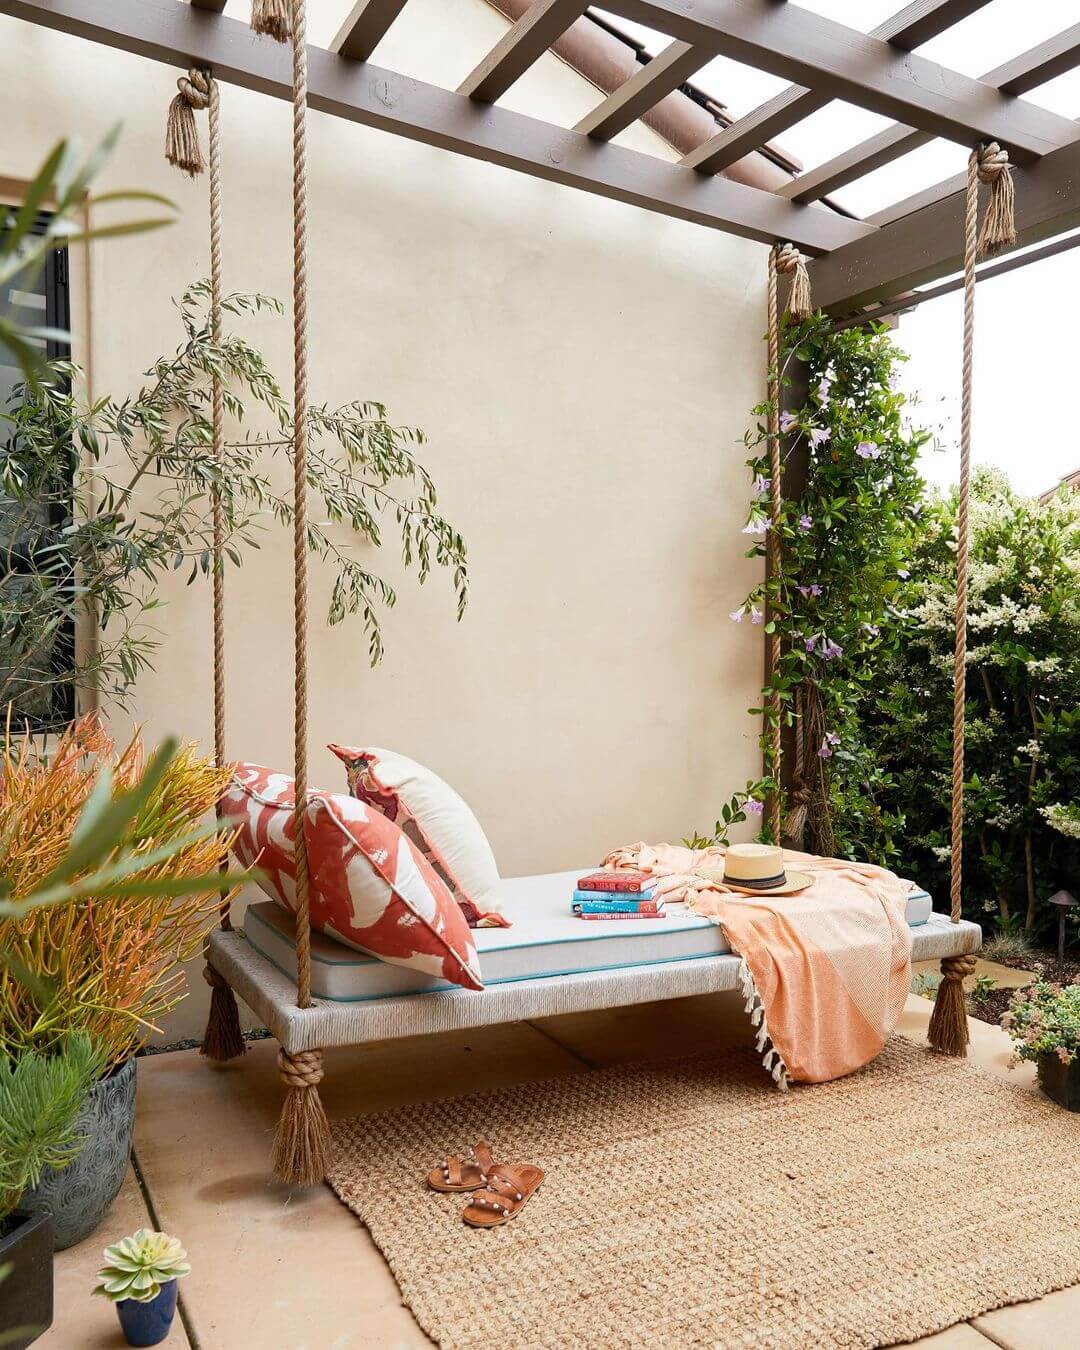 22 Marvelous Daybed Designs For Any Seasons - 143